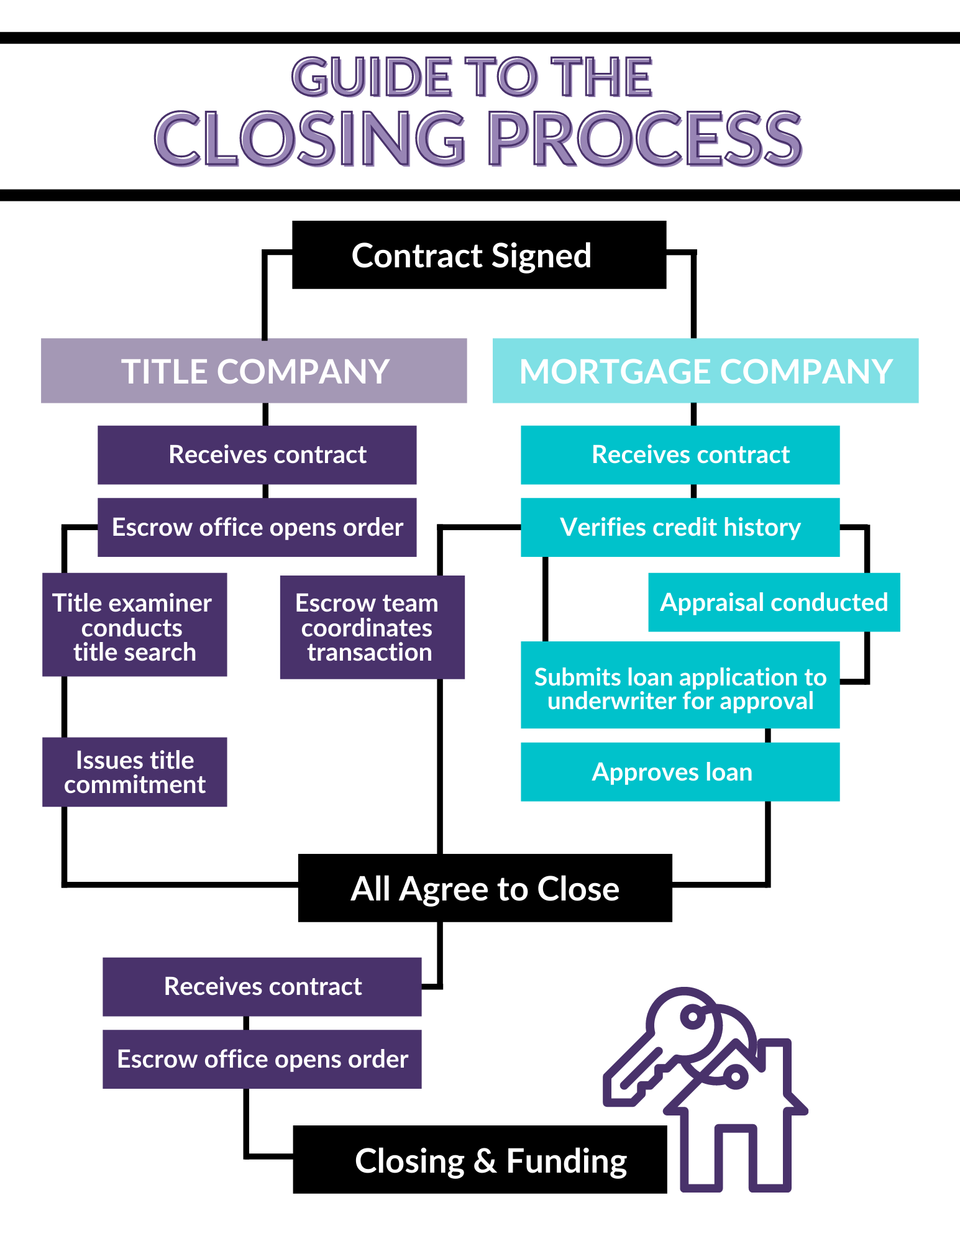 Guide to the closing process (1)